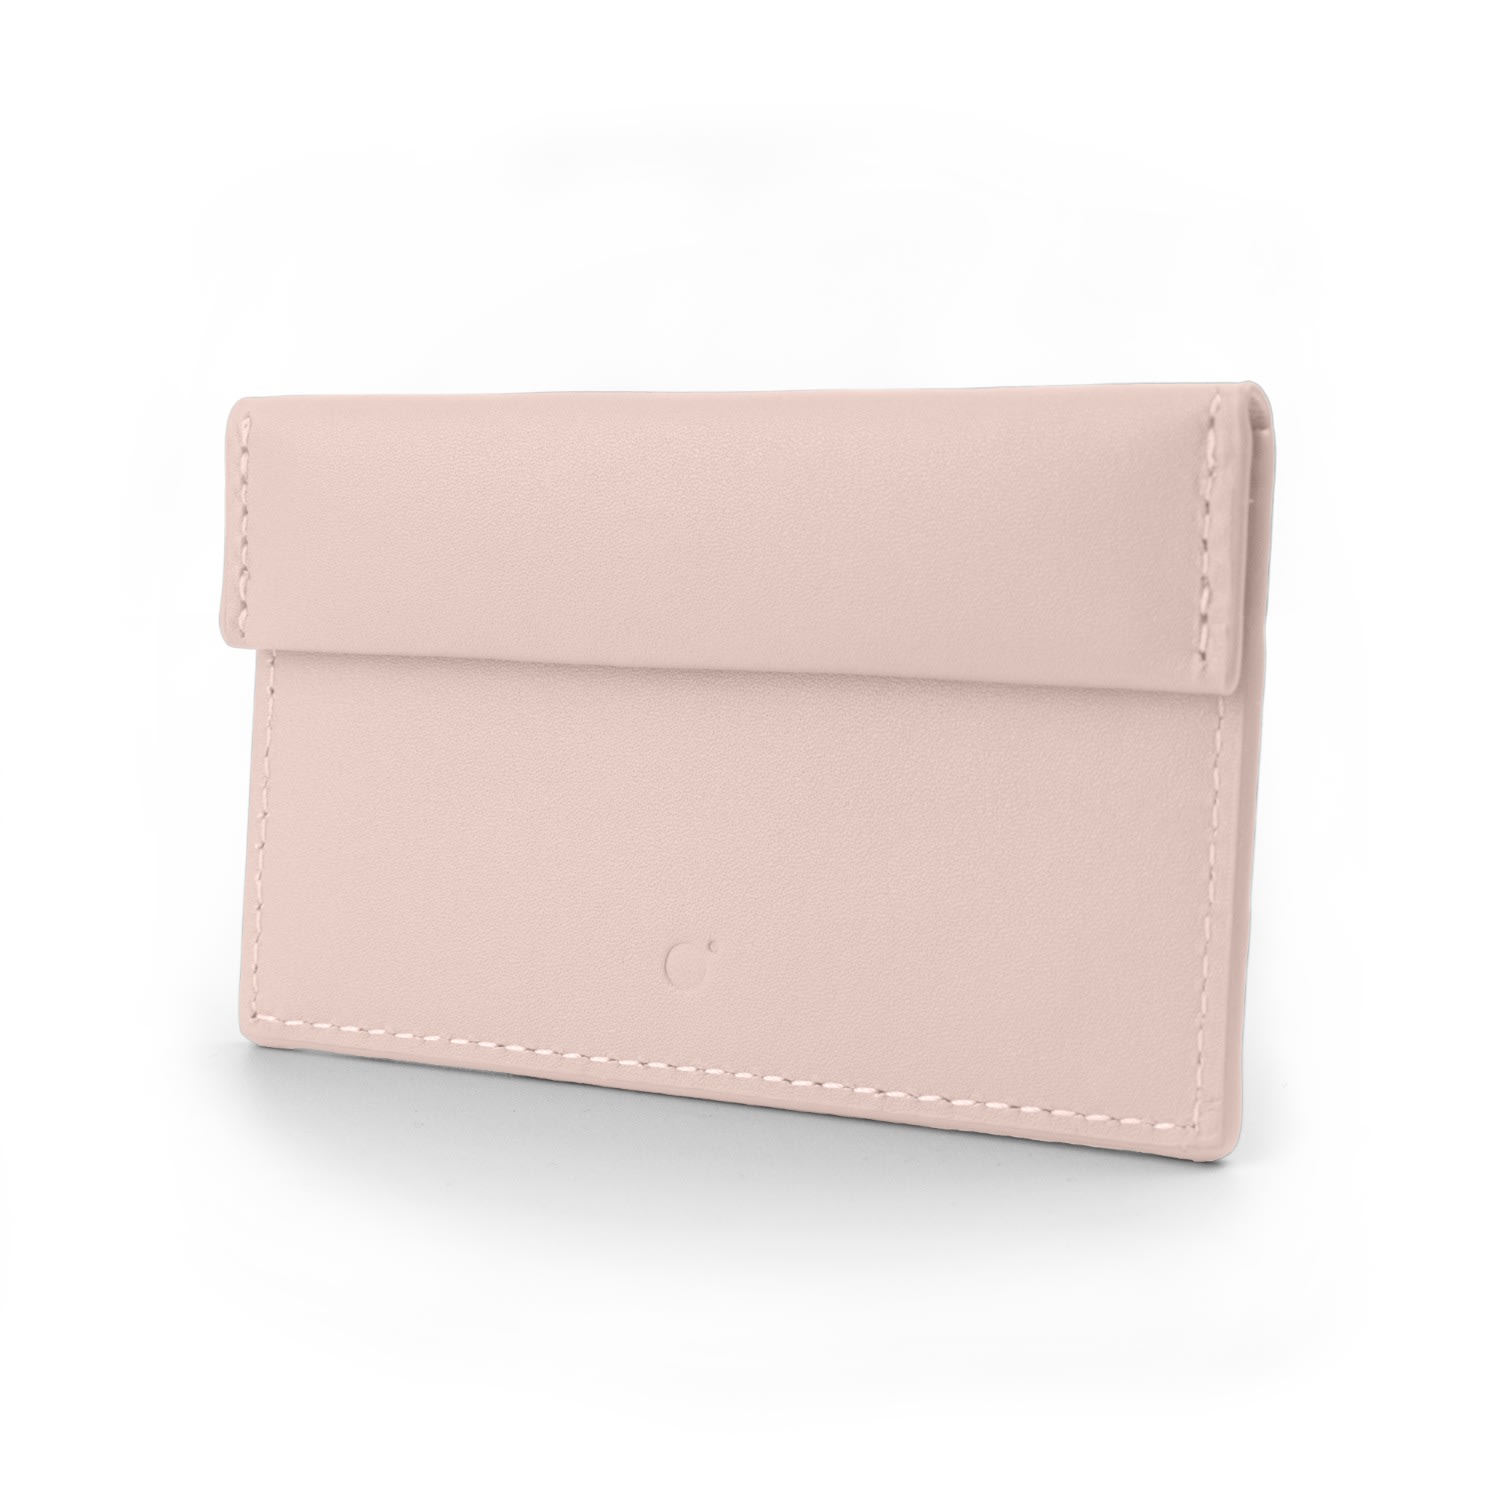 Women’s Rose Gold Compact Leather Coin And Card Holder - Nude Pink Godi.